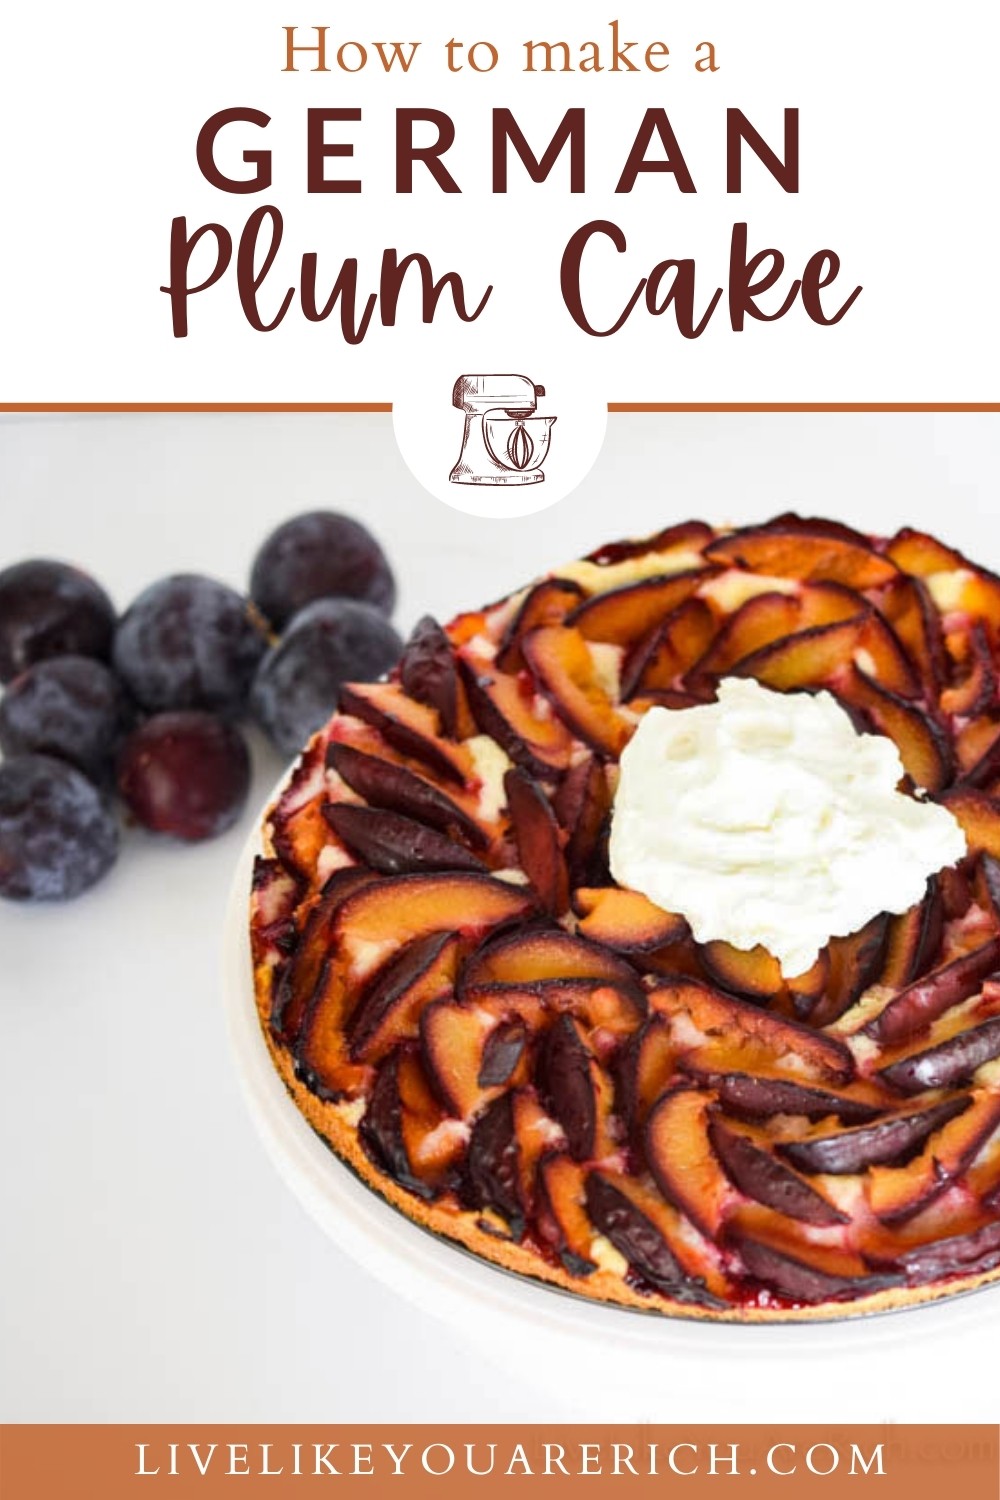 This German Plum Cake is a combination of a deliciously moist lemon tart topped with sweet plums baked to perfection. Super easy to make and delicious. #germanplumcake #plumcake